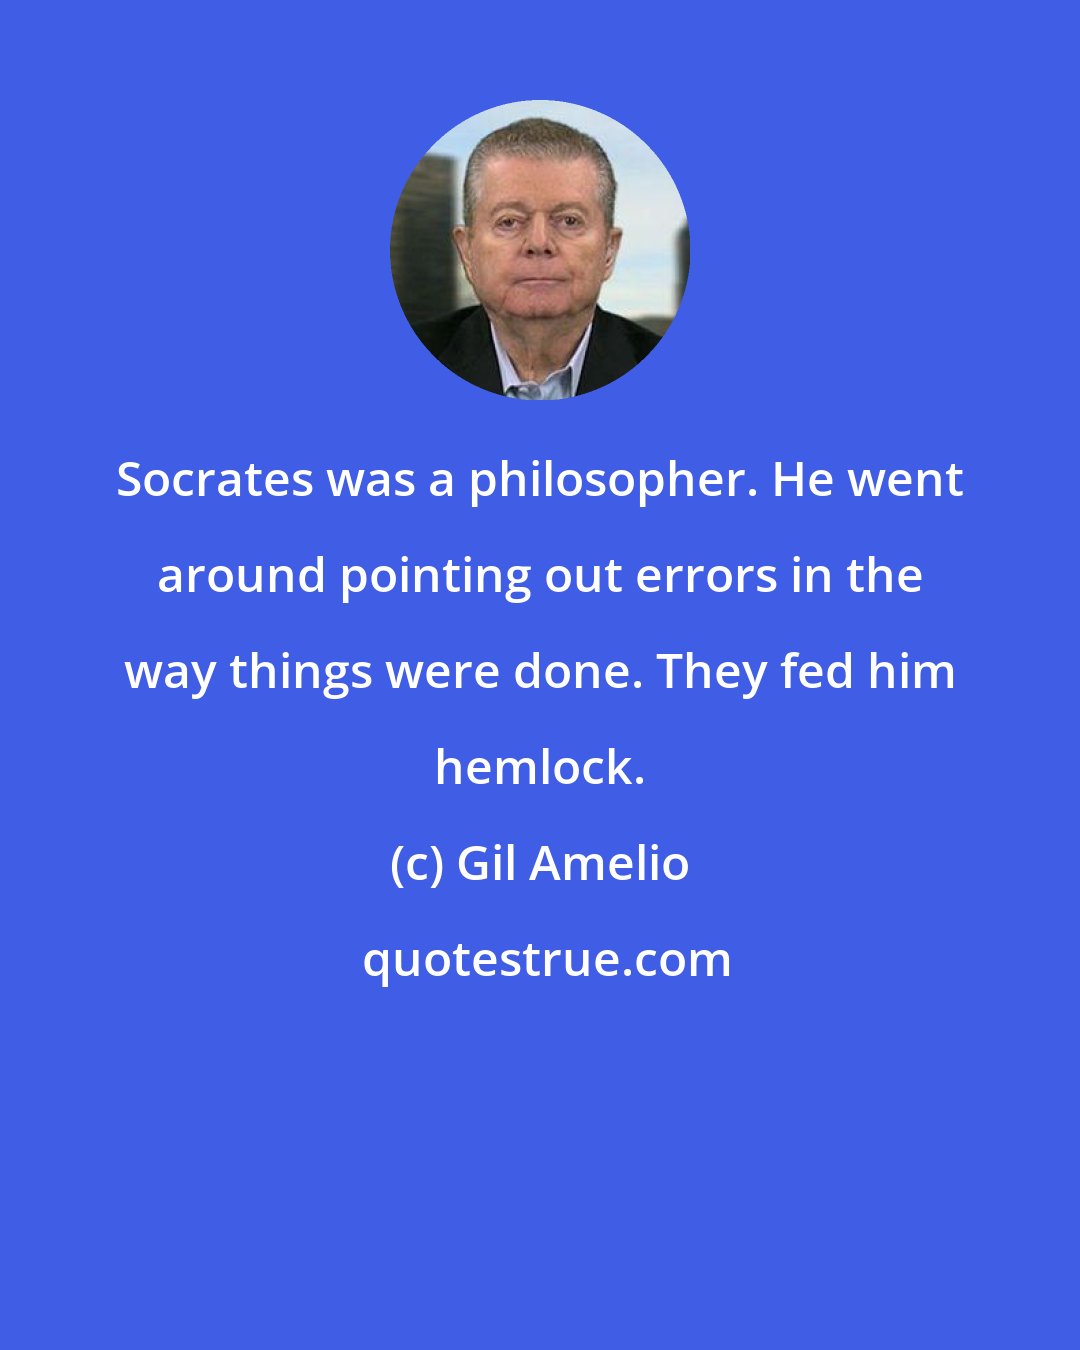 Gil Amelio: Socrates was a philosopher. He went around pointing out errors in the way things were done. They fed him hemlock.